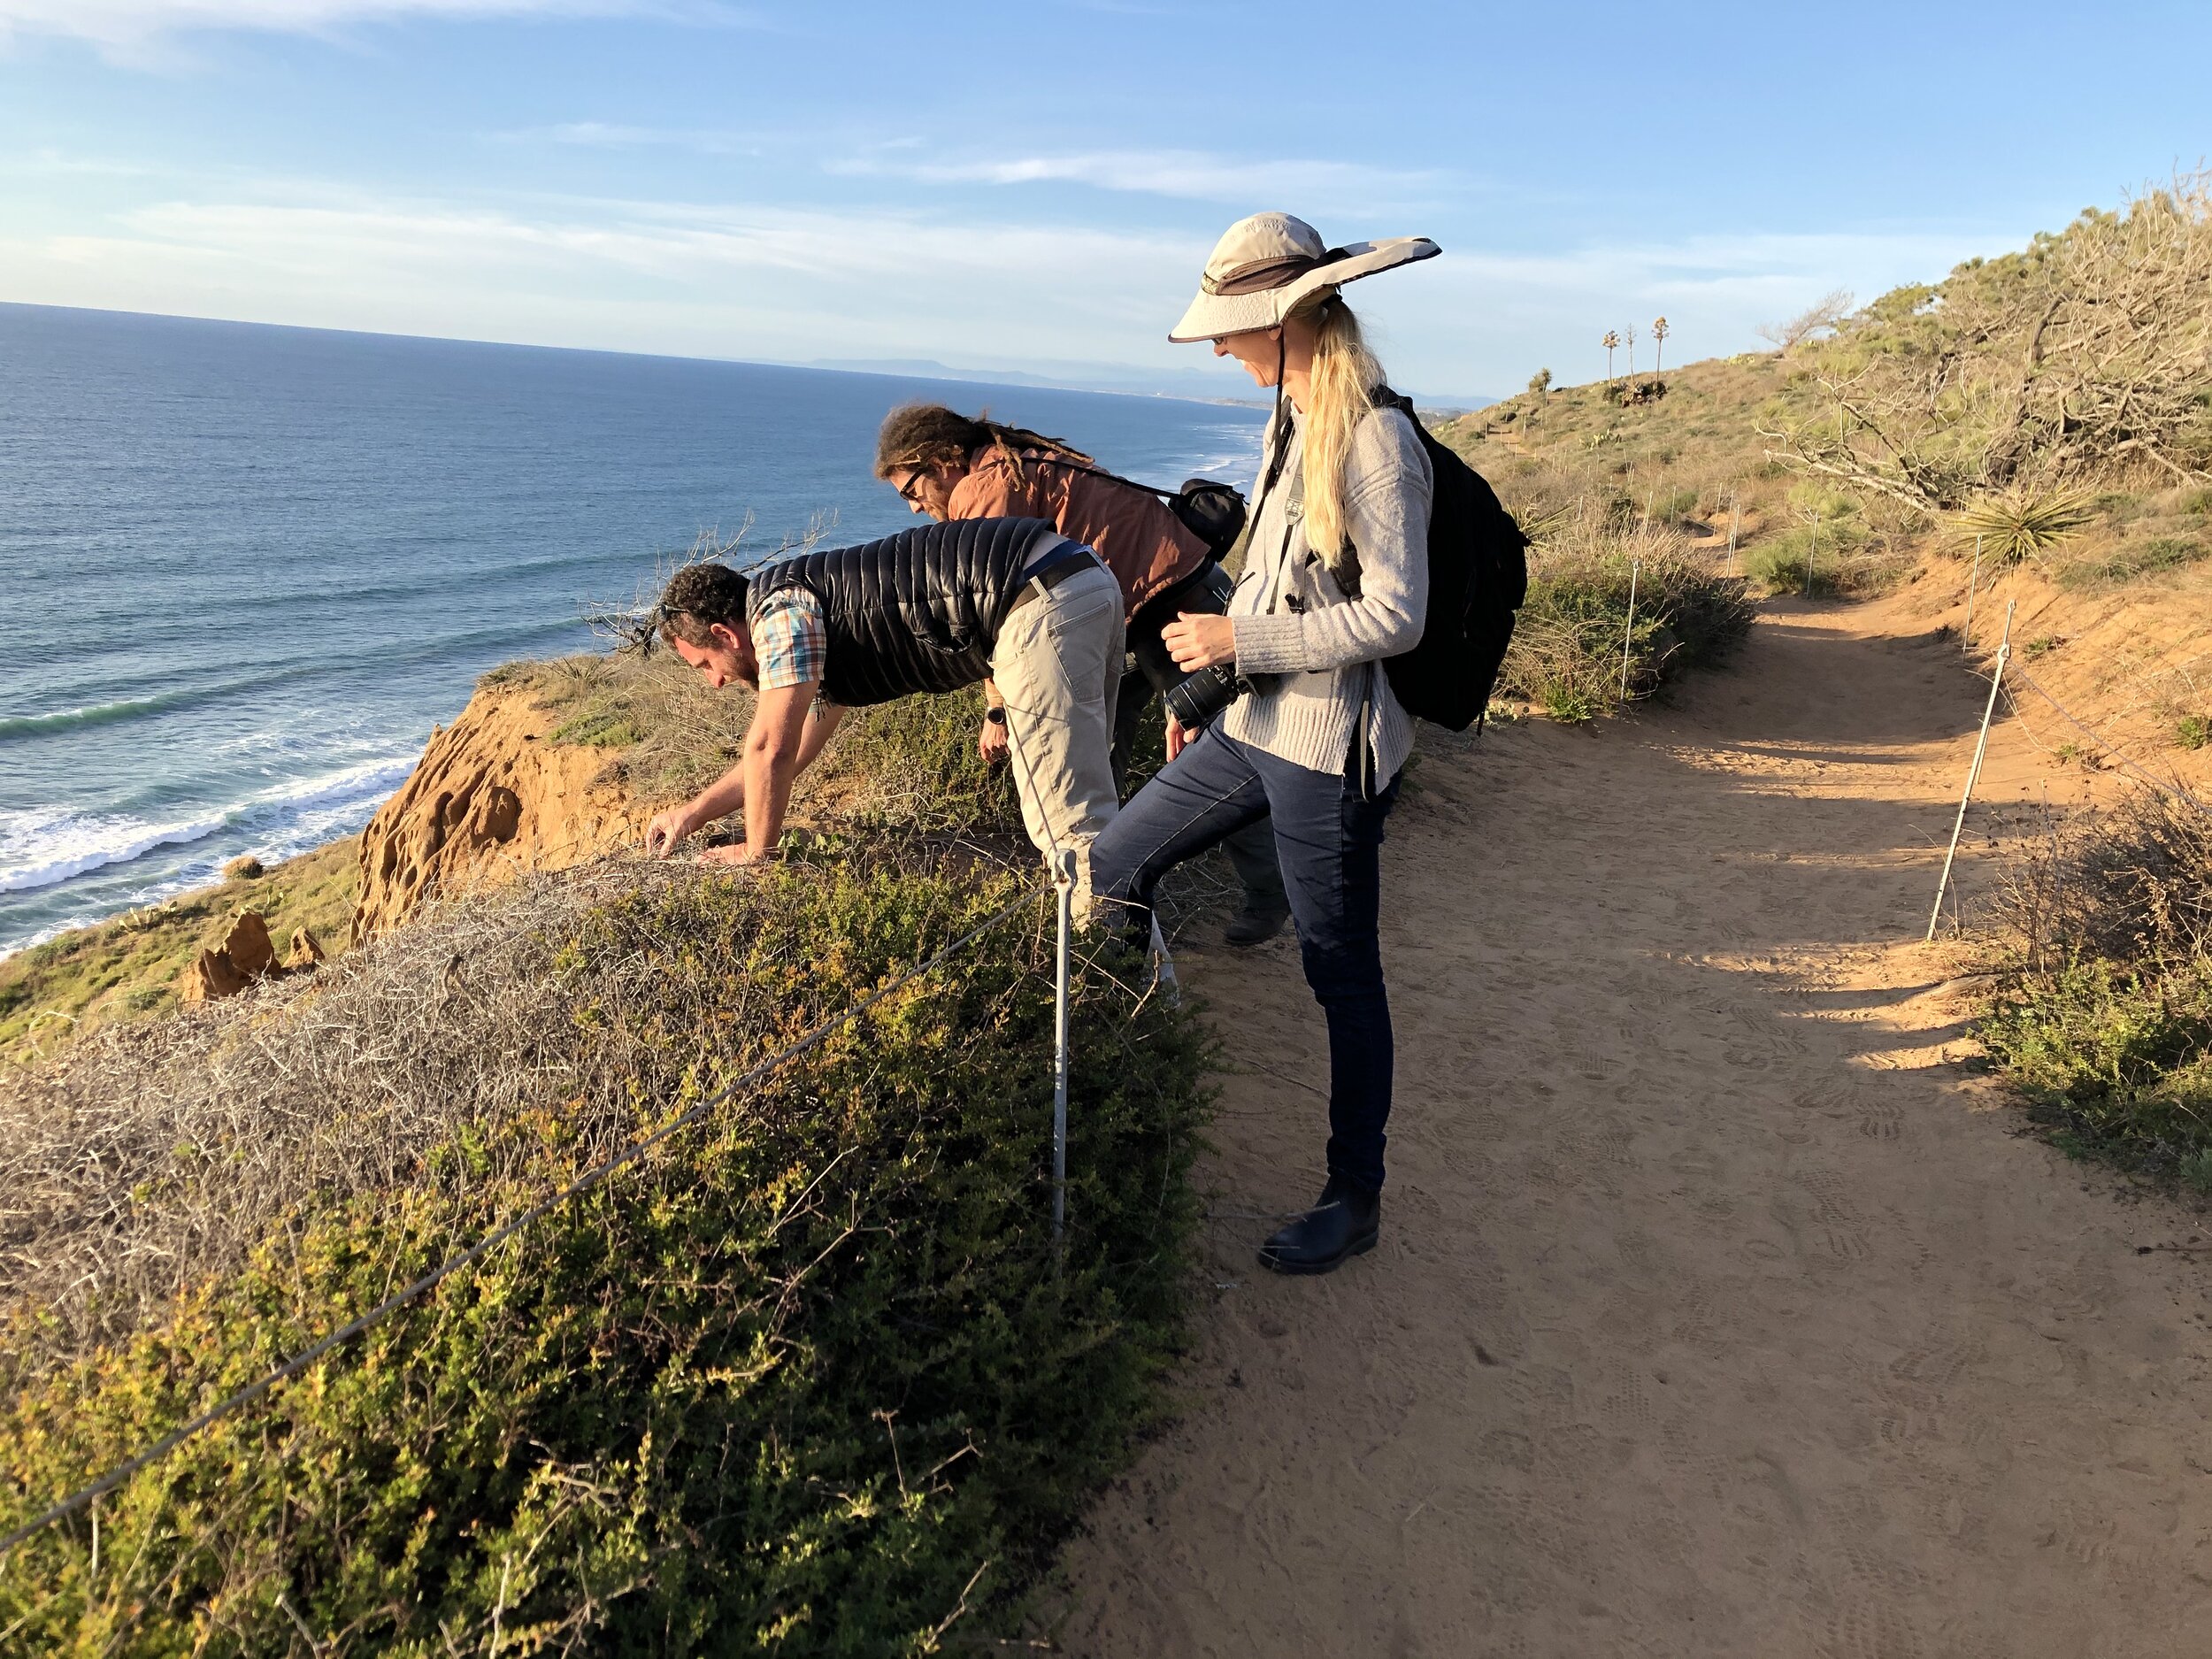  L to R - Ari Novy, Tony Gurnoe and Bradi Eide getting up close with the plants at Torrey Pines State Natural Reserve.